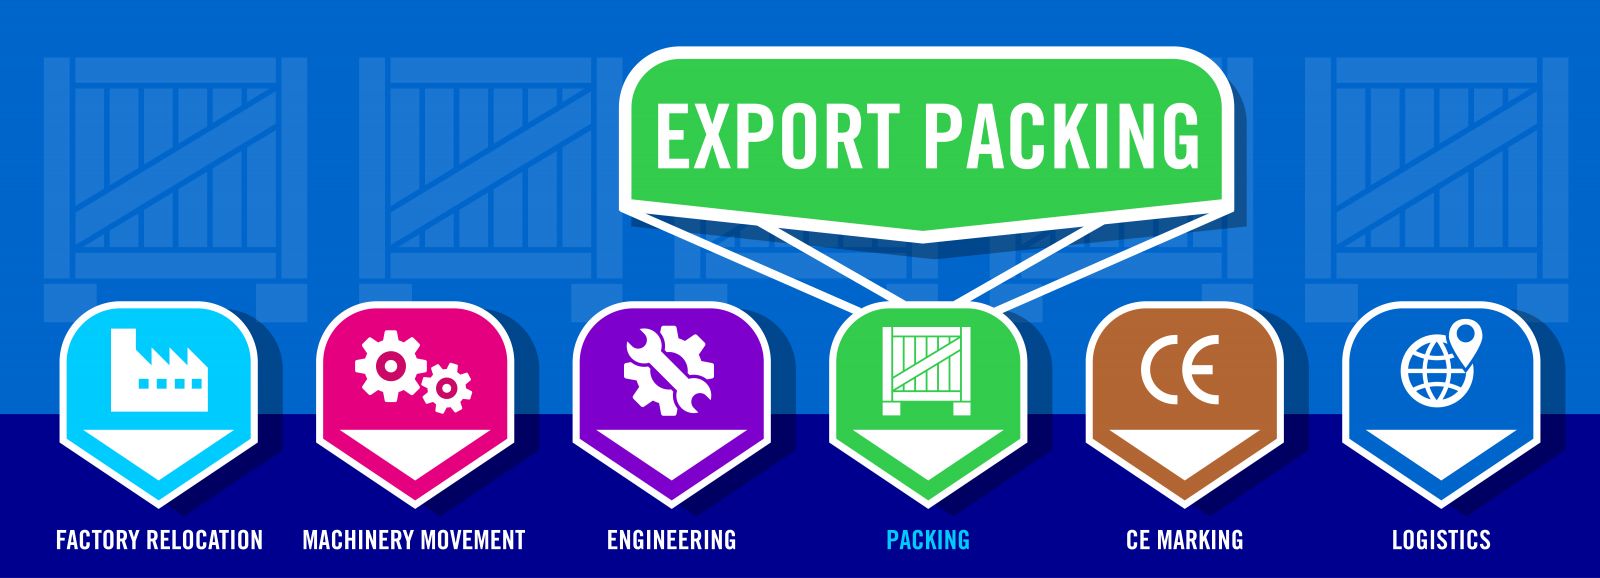 How Export Packing fits into the IES company structure